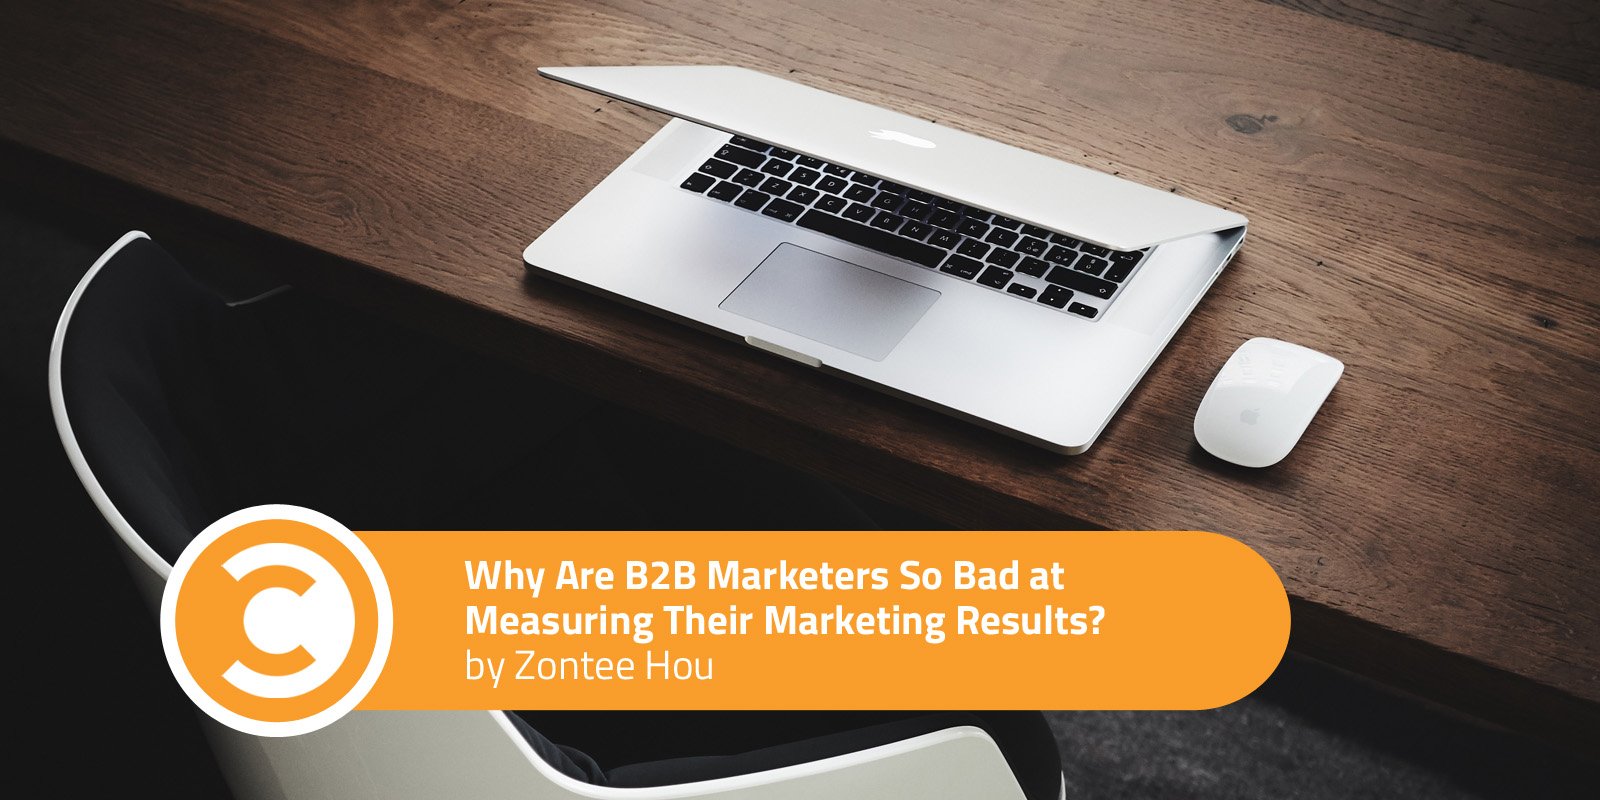 Why Are B2B Marketers So Bad at Measuring Their Marketing Results